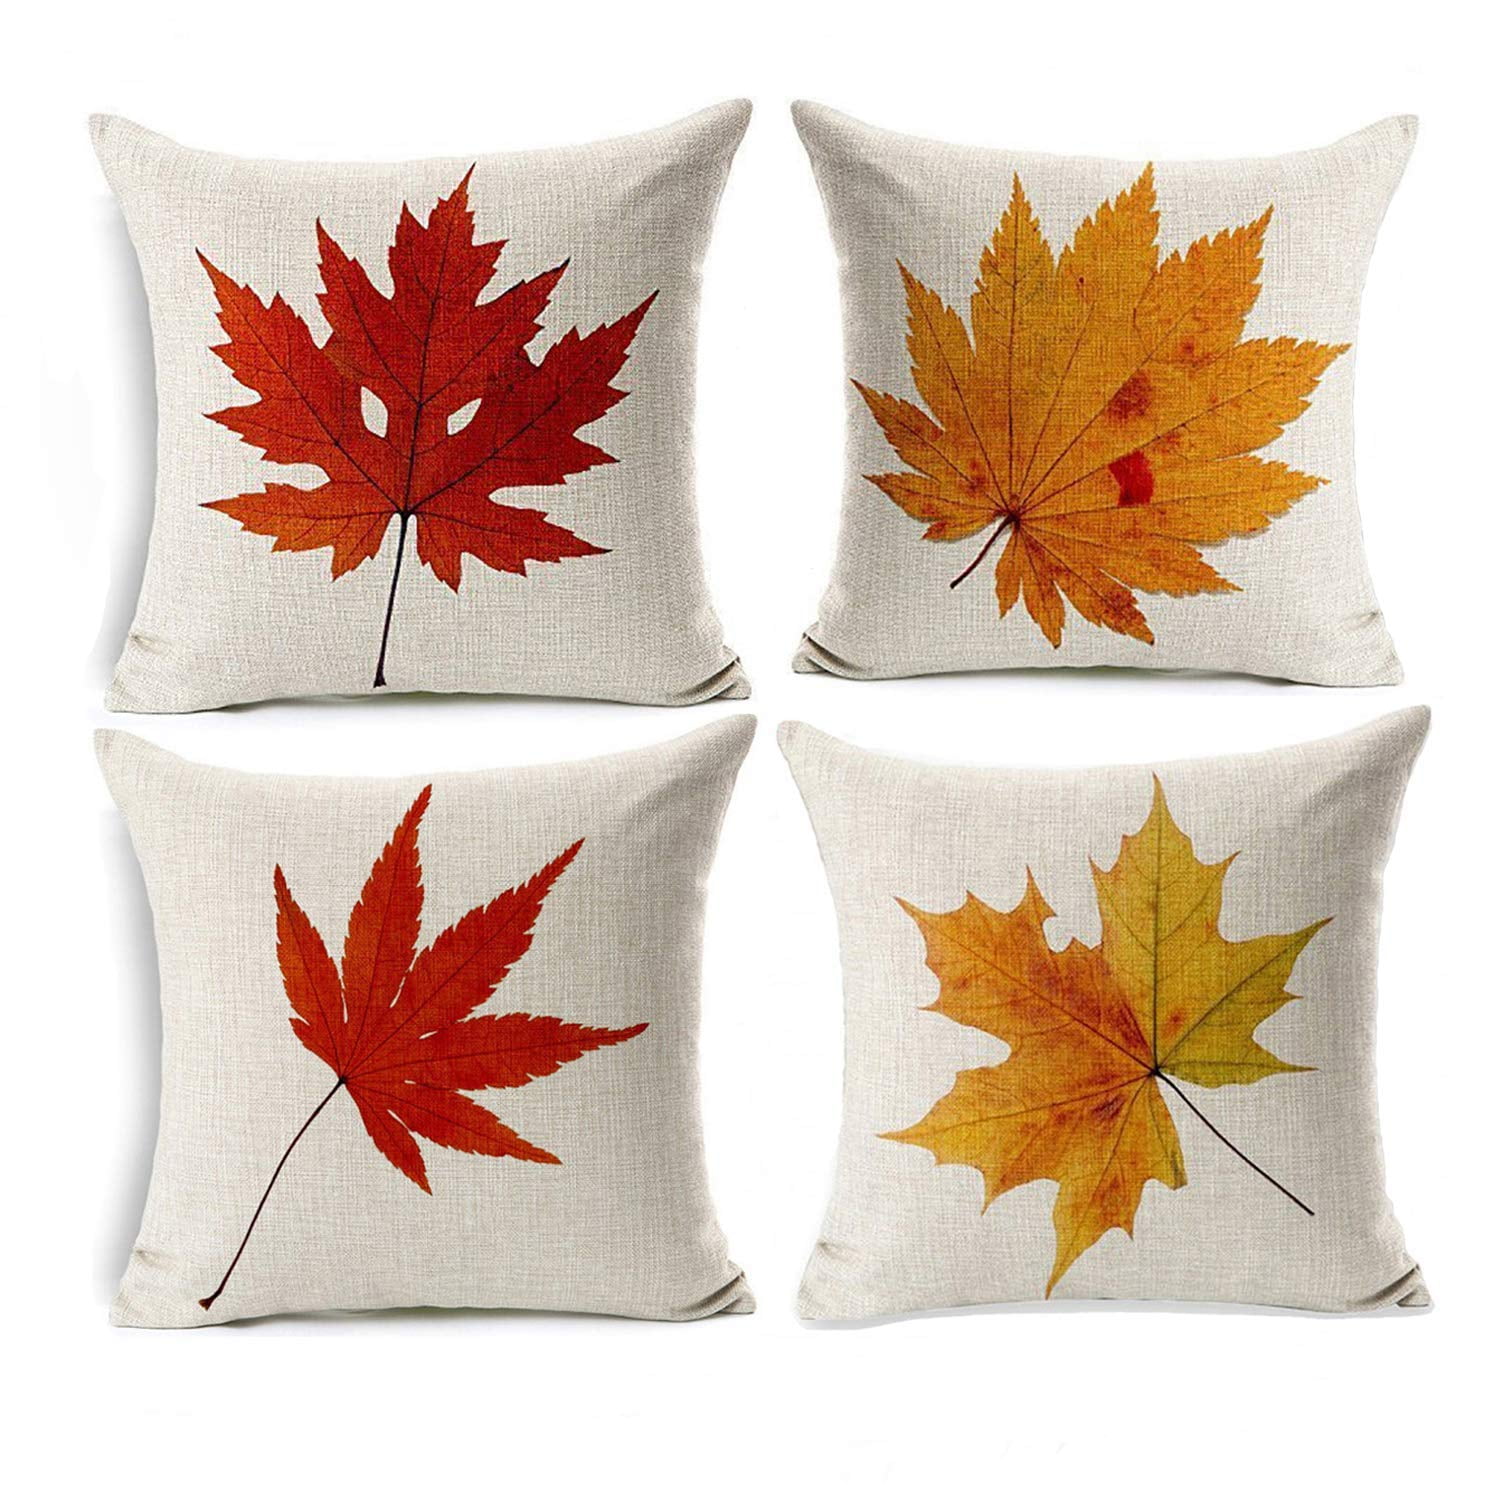 Easternproject Fall in Love Maple Leaf Pillow Covers Red Orange Autumn Harvest Gnomes Pumpkin Throw Pillow Cases Set of 4 18”x18” Thanksgiving Farmhouse Decorations Cushion Cover Cotton Linen